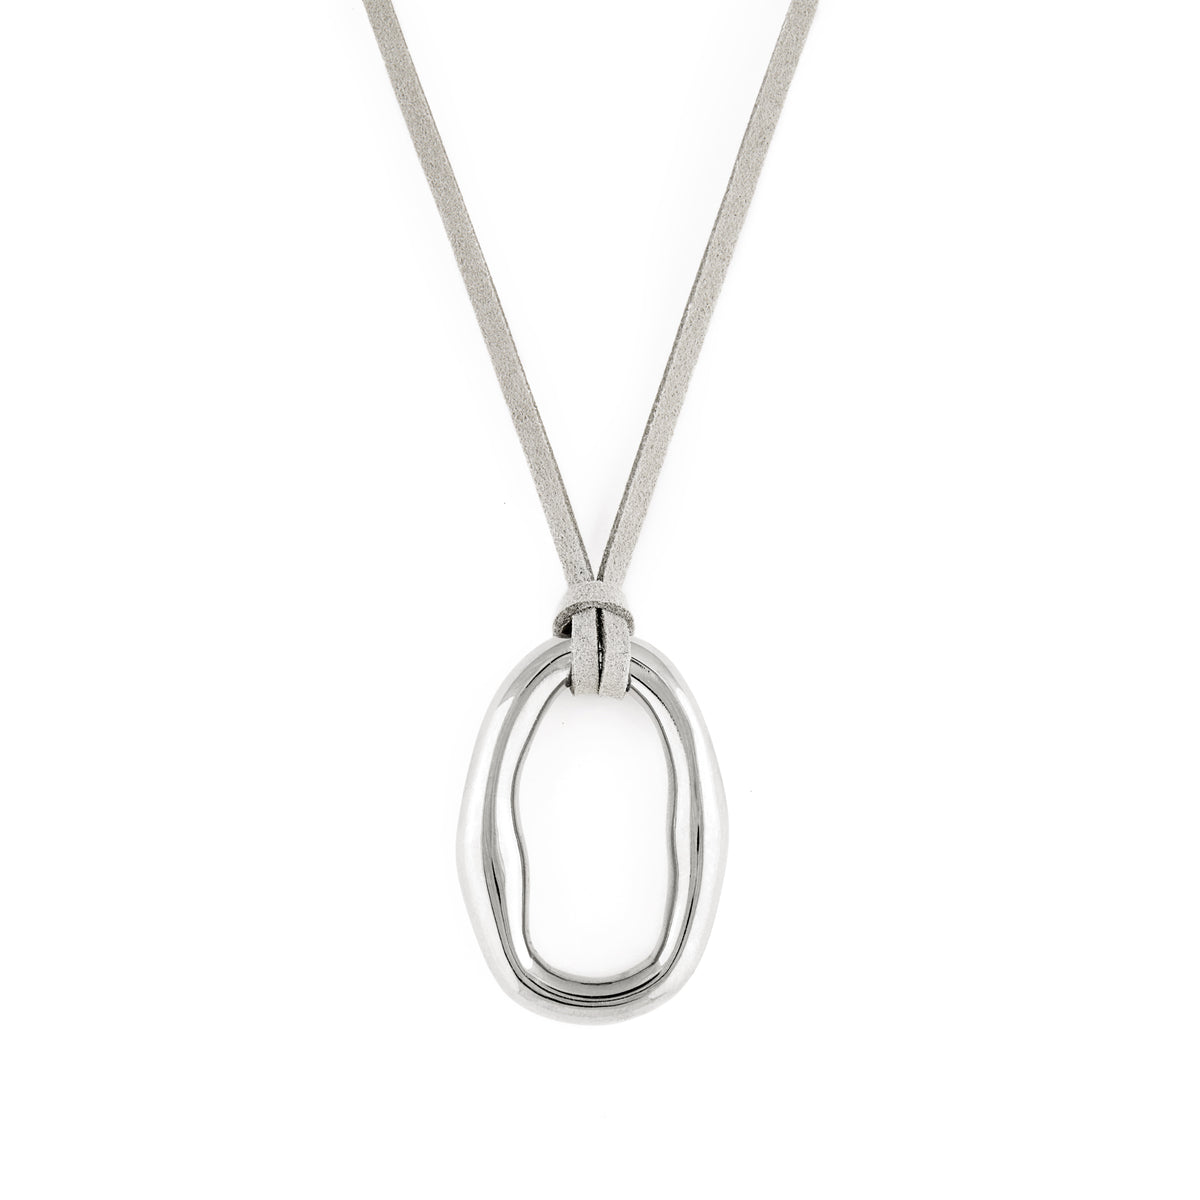 Dolce Necklace - Silver Dolce Necklace - Silver